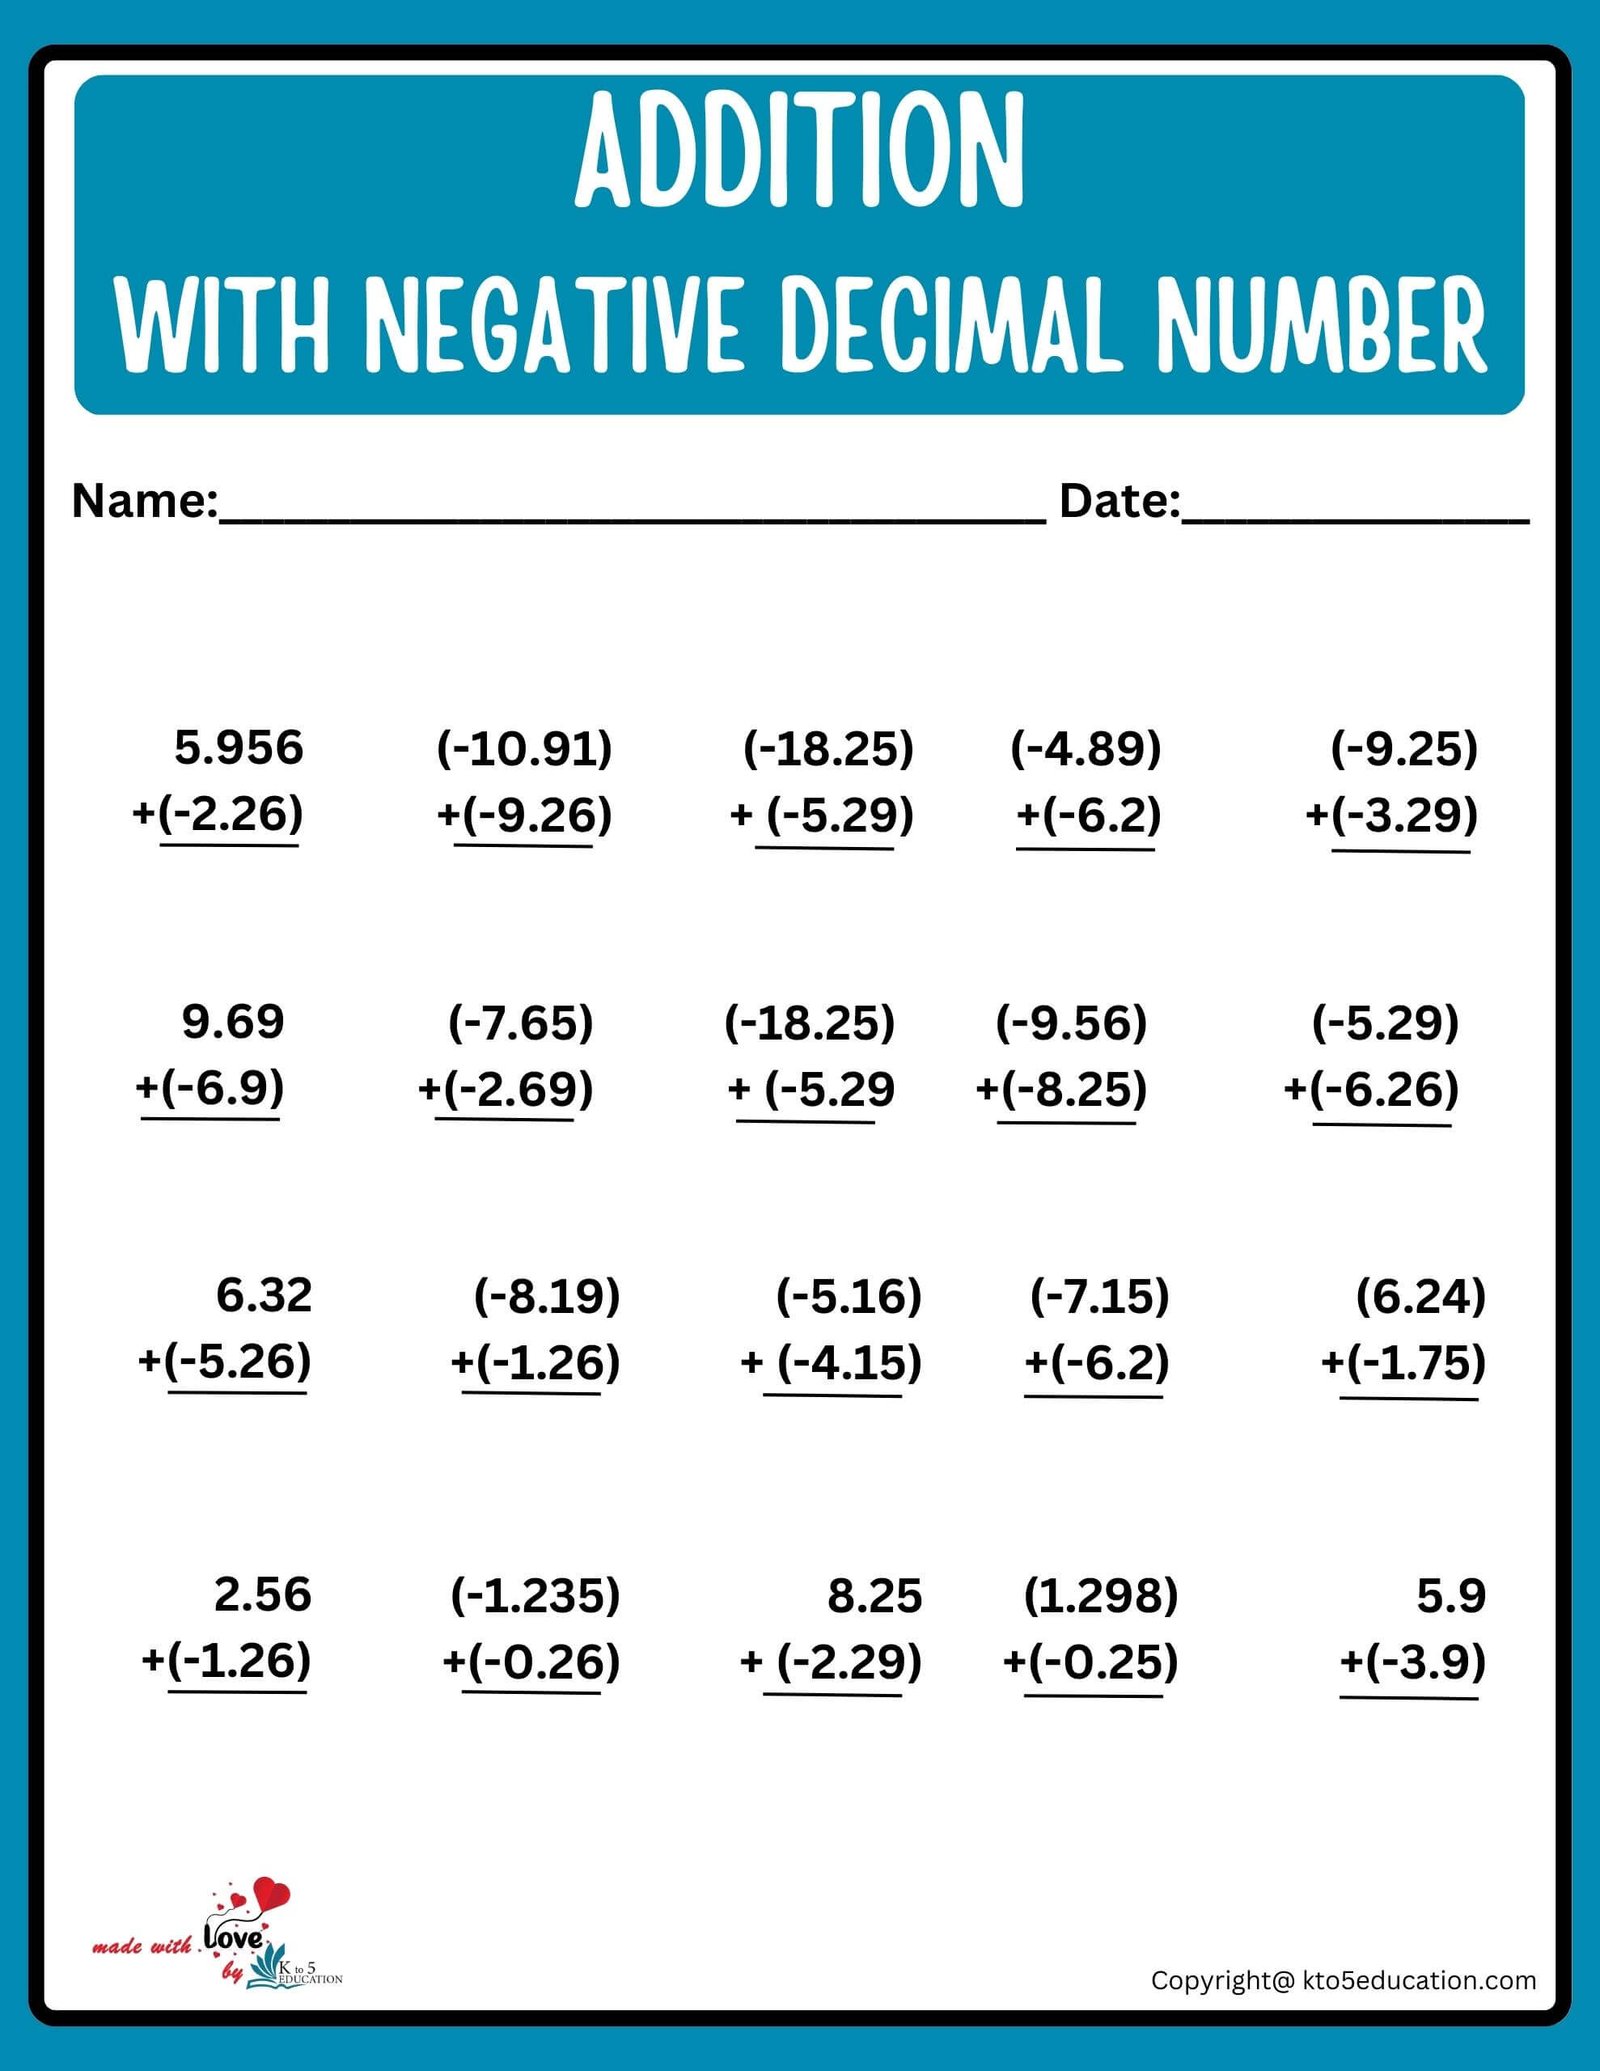 55 Adding With Decimals Worksheets 46